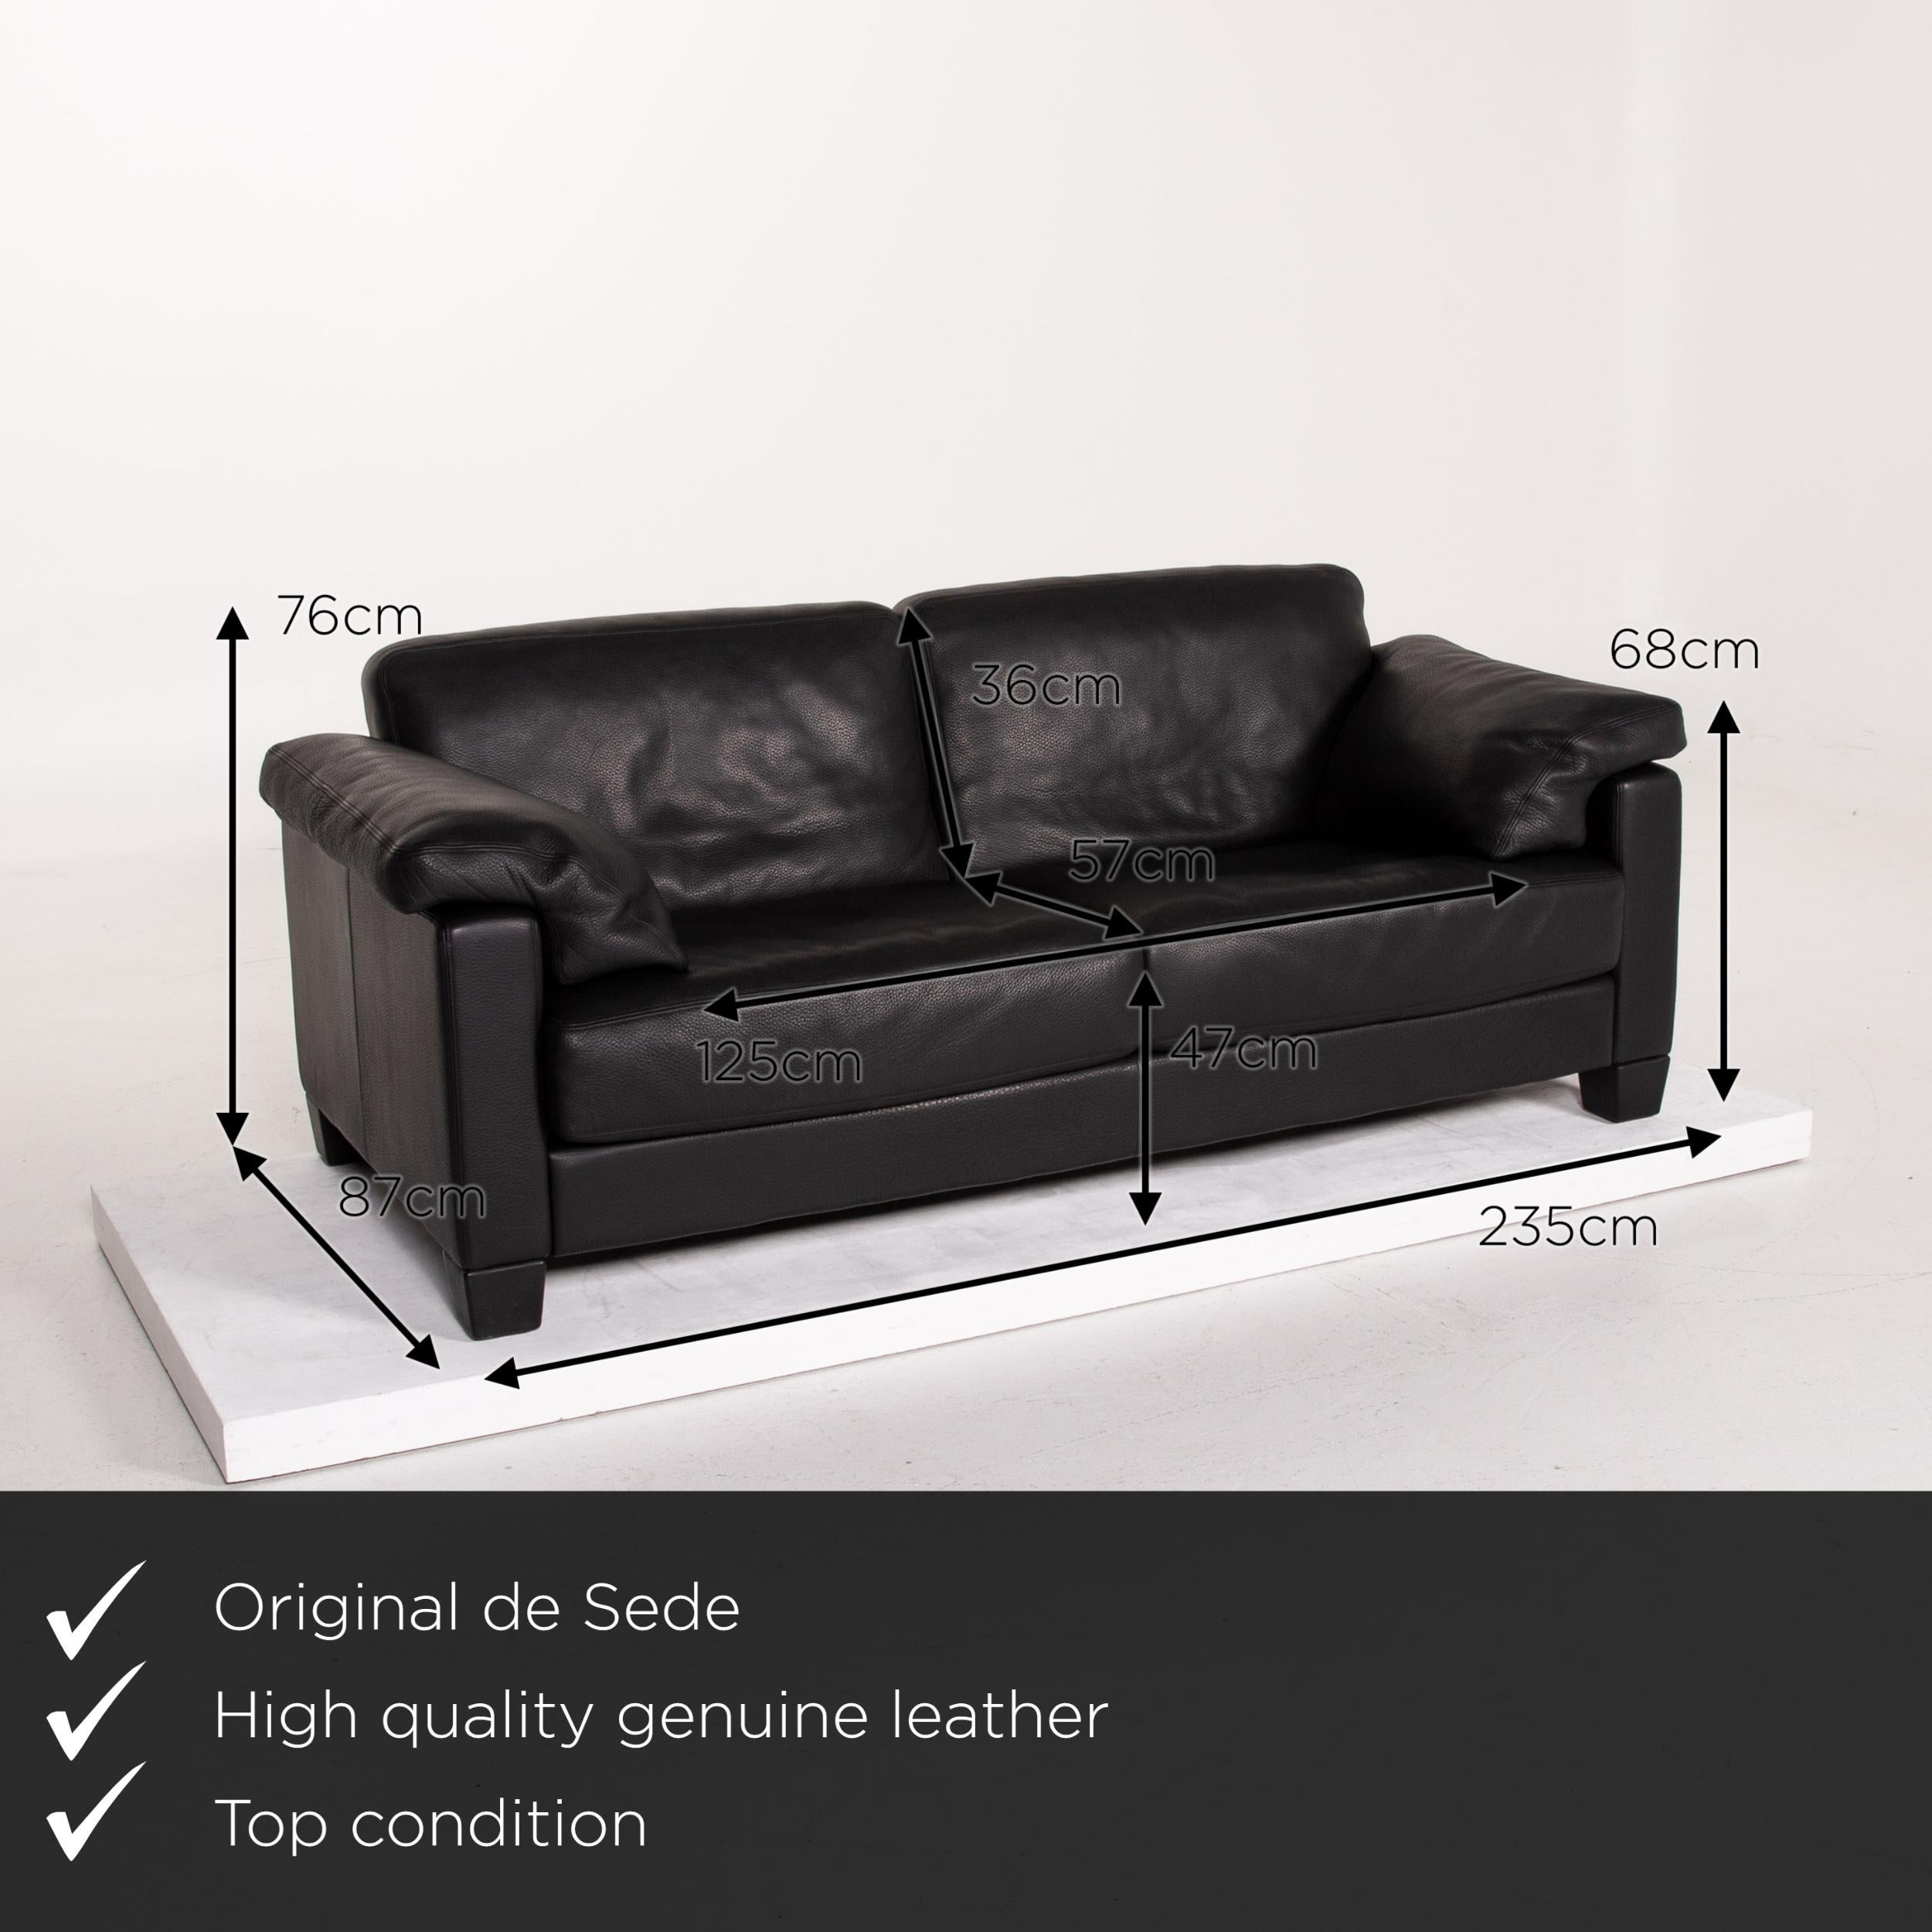 We present to you a De Sede DS 17 leather sofa black two-seat couch.

Product measurements in centimeters:

Depth 87
Width 235
Height 76
Seat height 47
Rest height 68
Seat depth 57
Seat width 125
Back height 36.
 
  
   